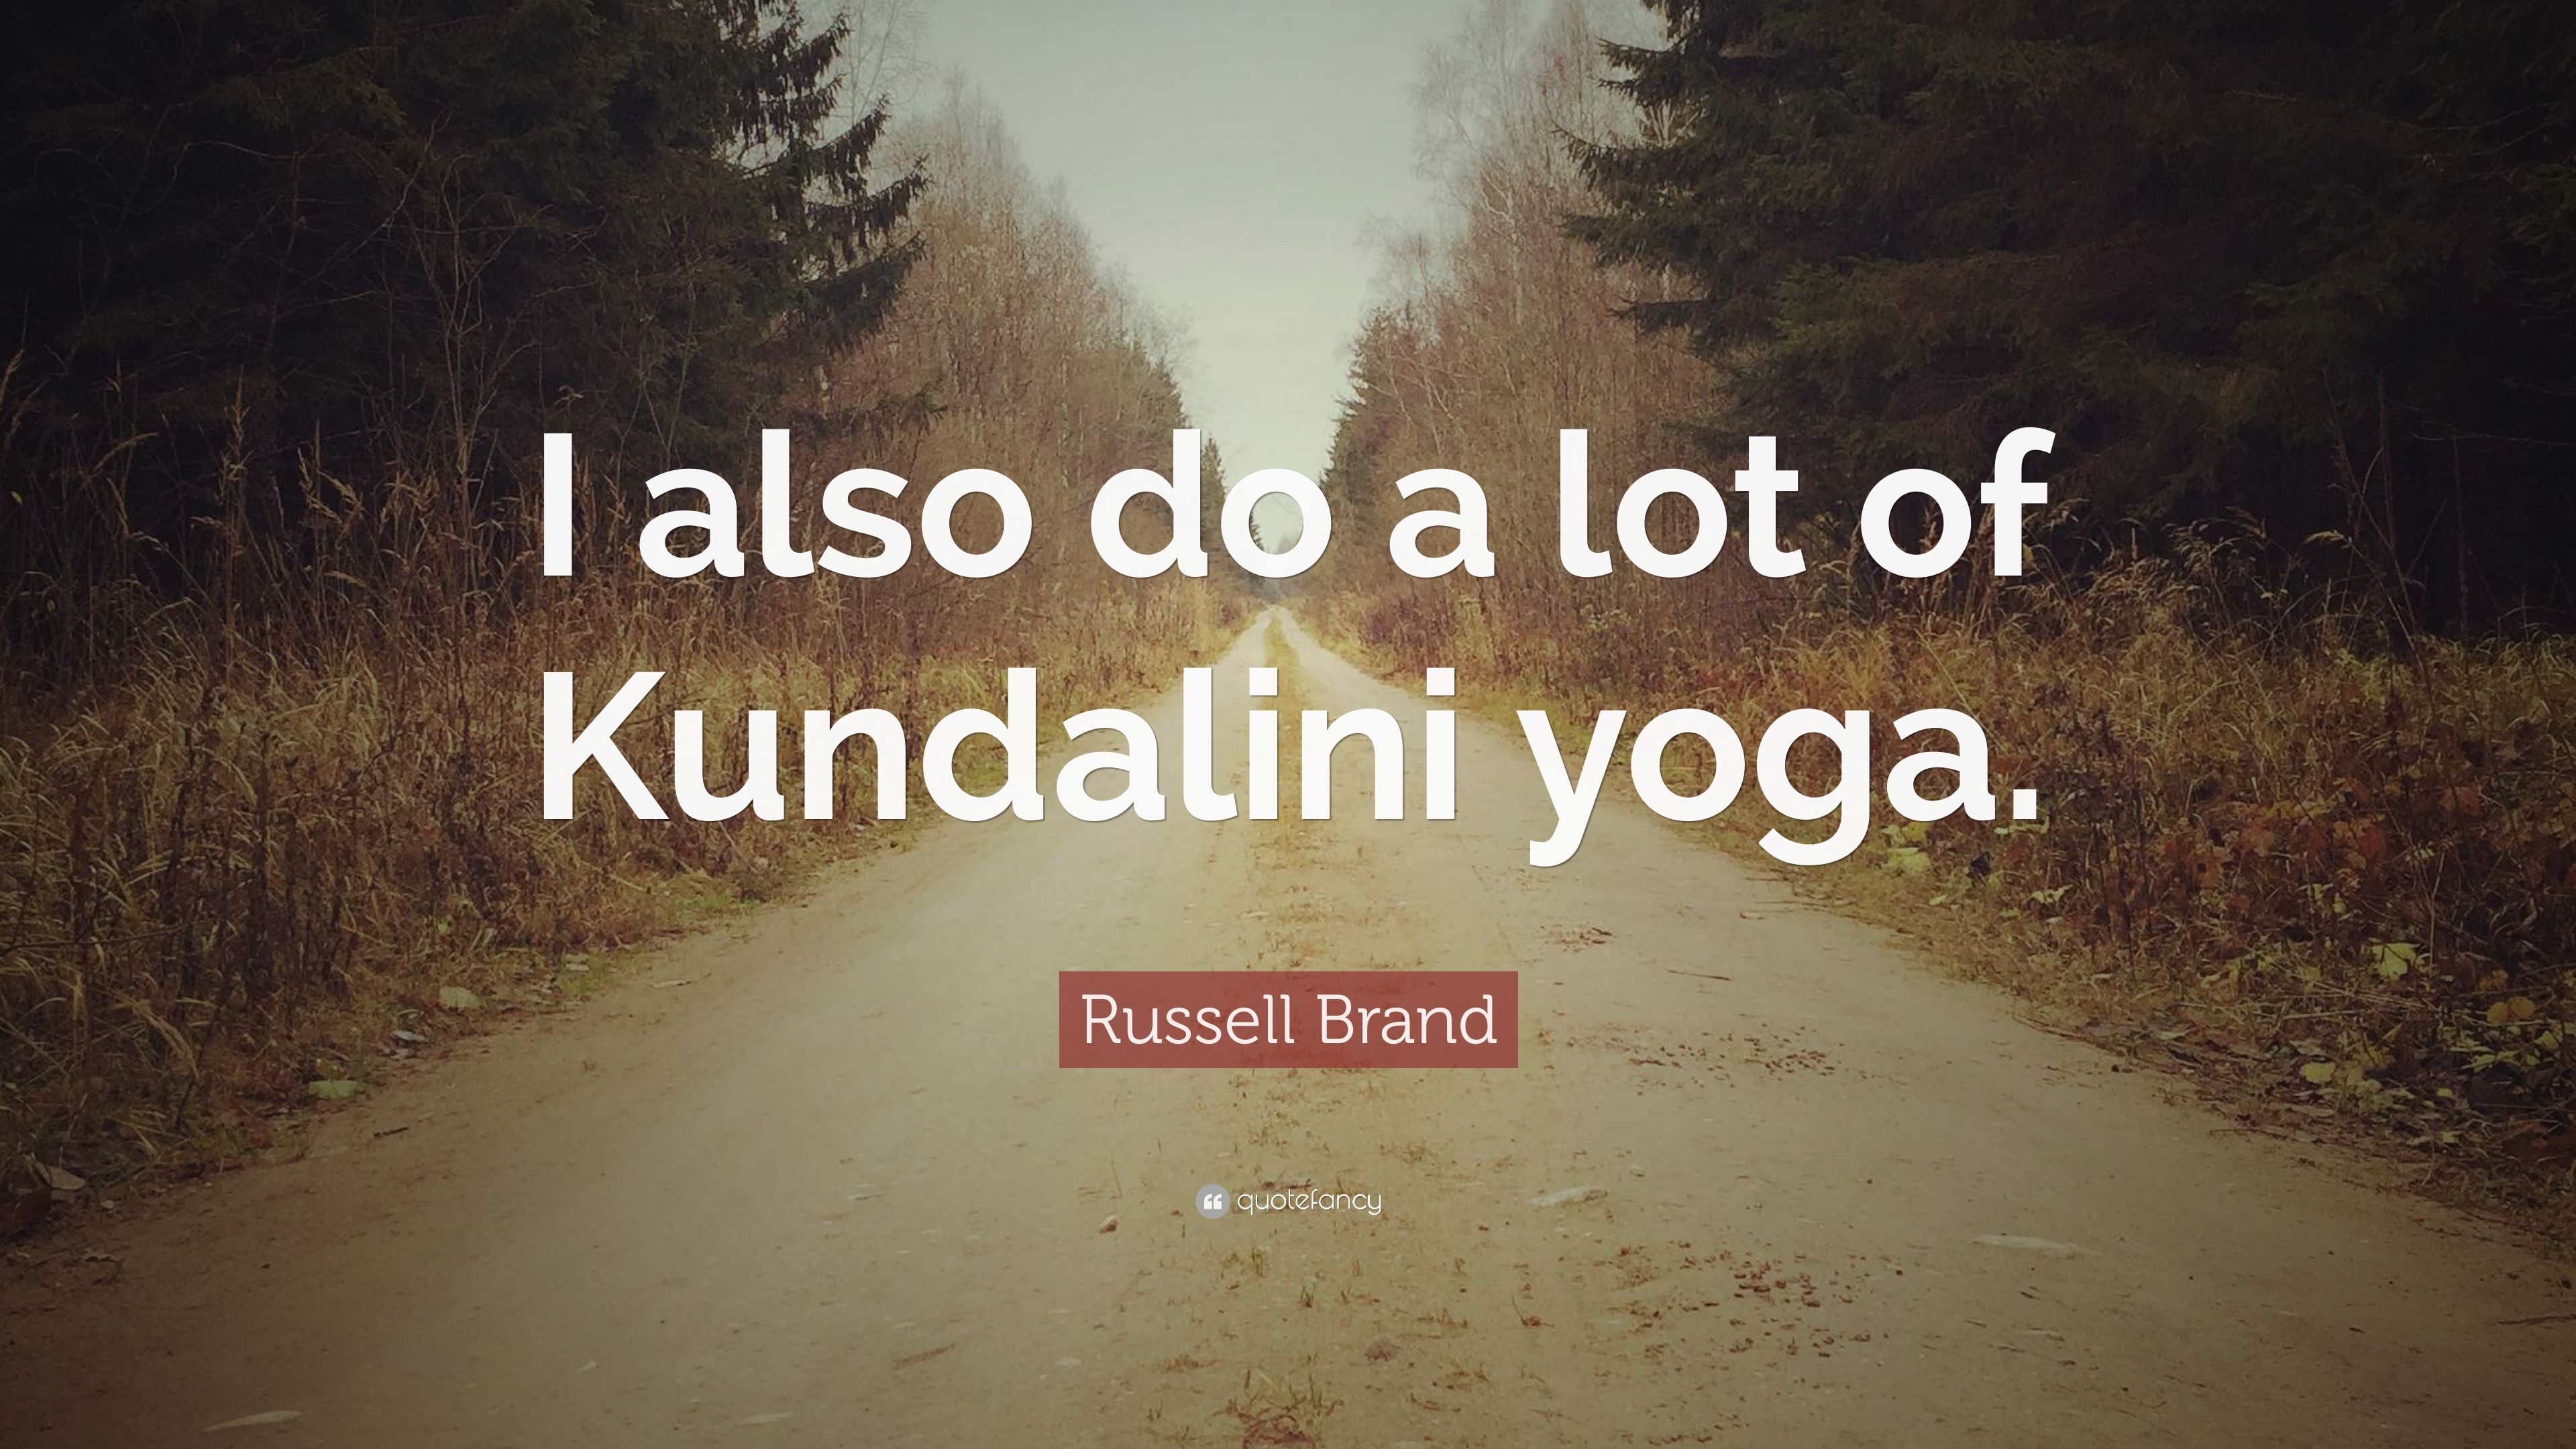 Russell Brand Quote: “I also do a lot of Kundalini yoga.” 12